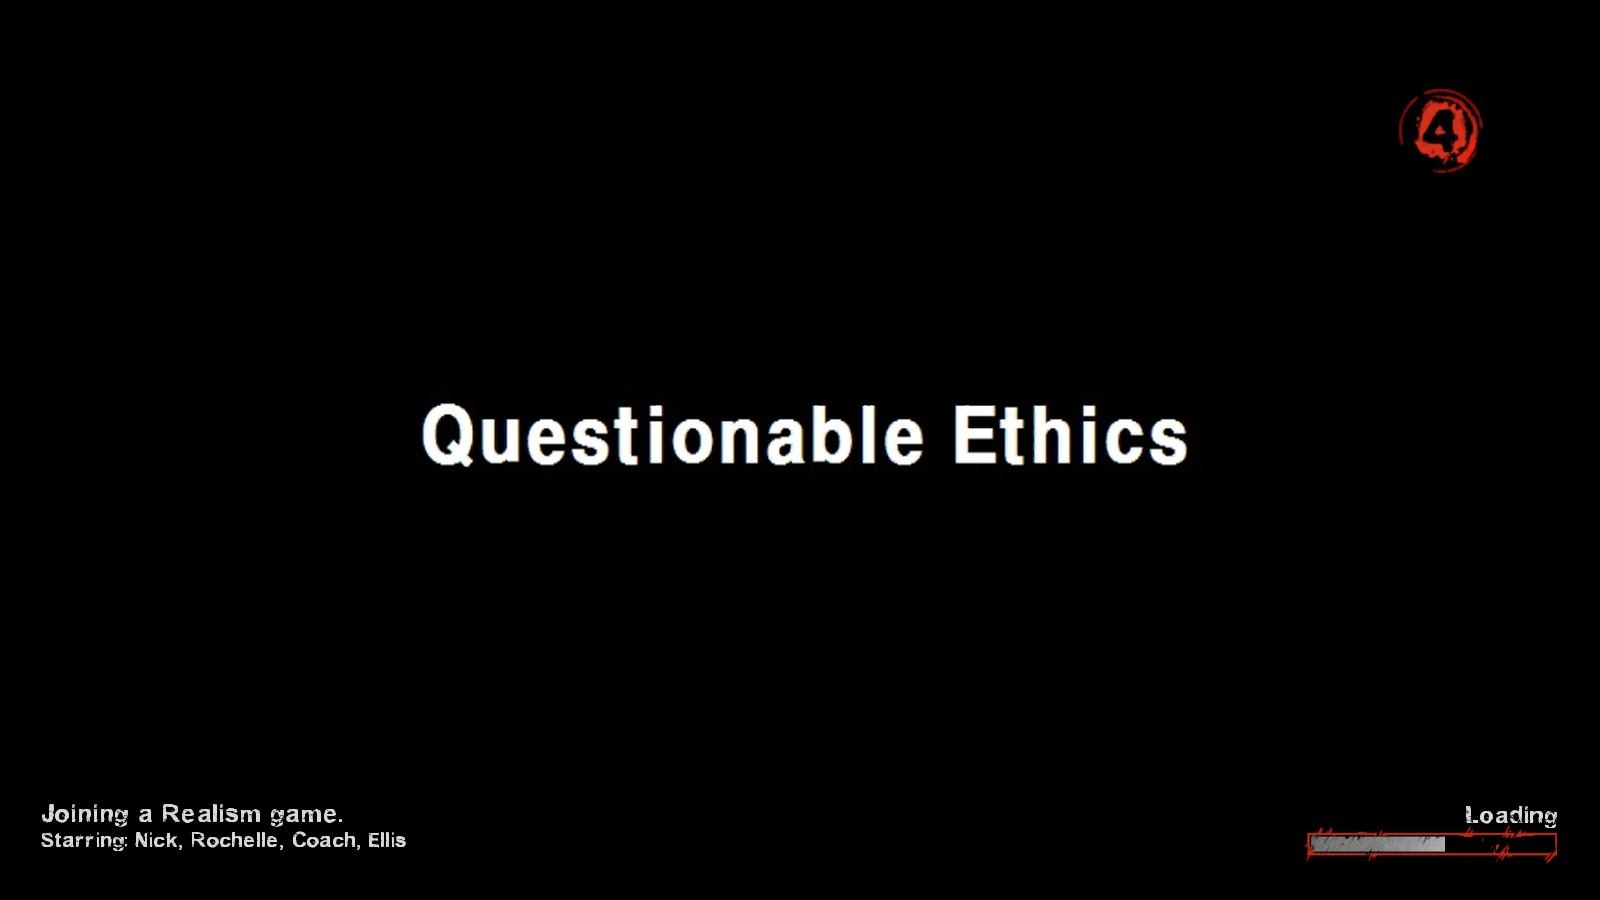 625654184_preview_questionable_ethics